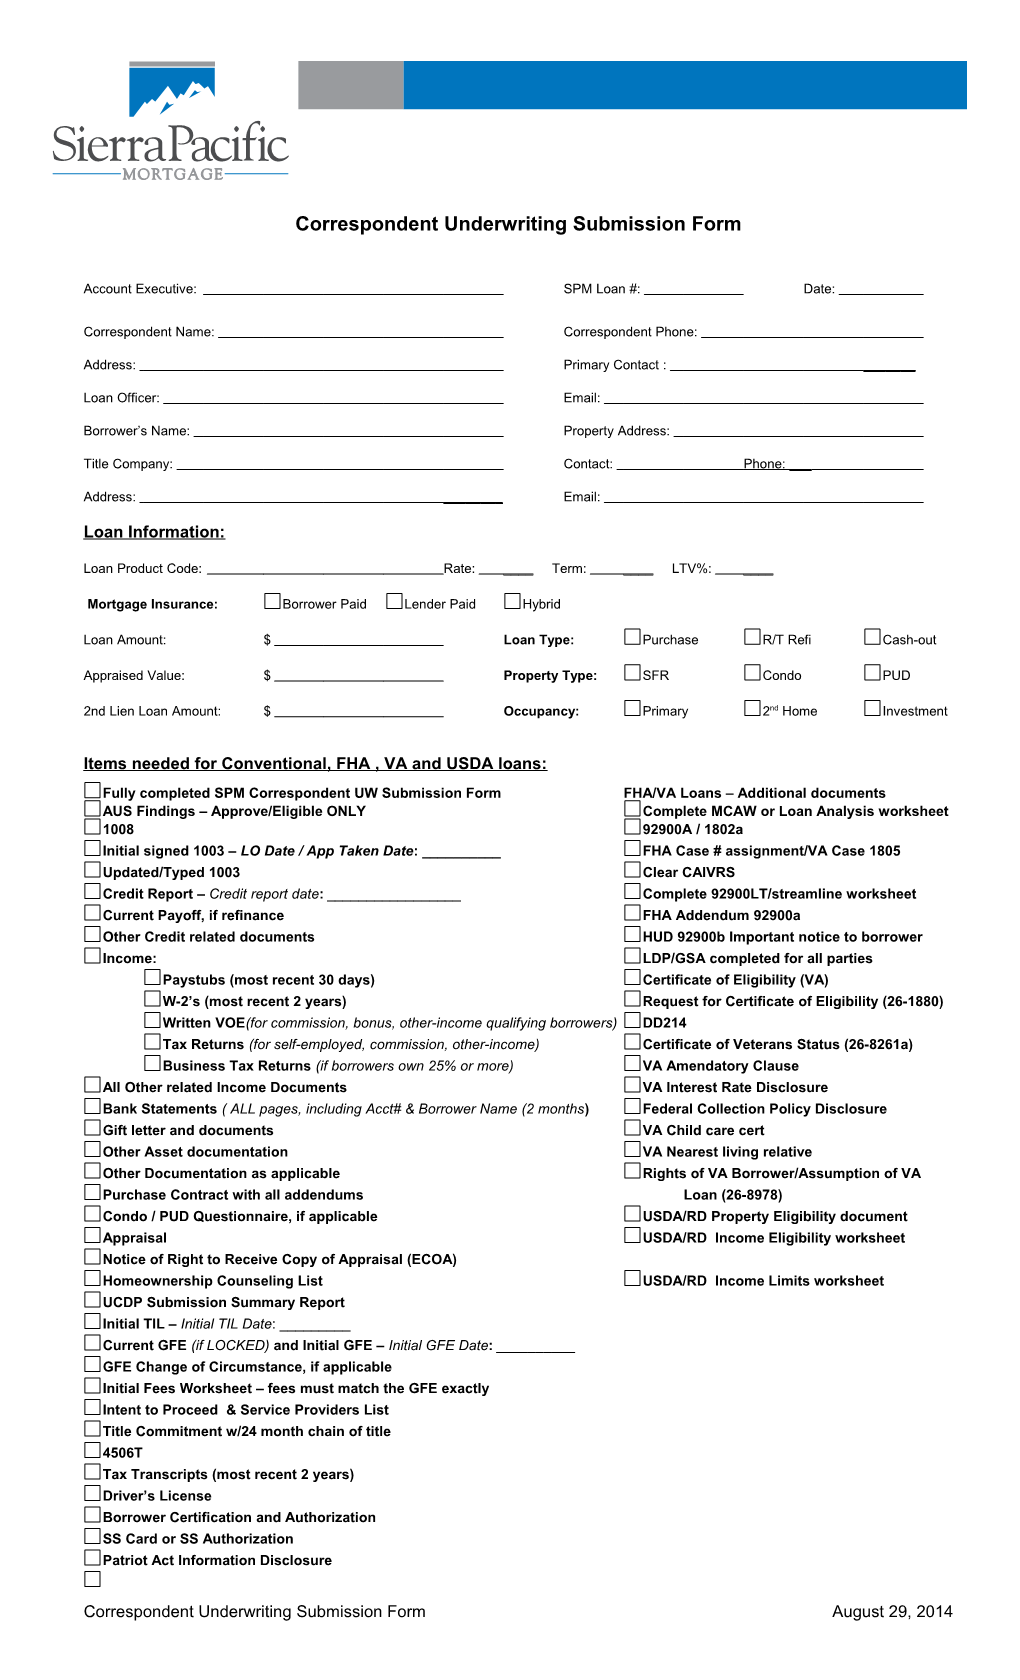 Correspondent Underwriting Submission Form